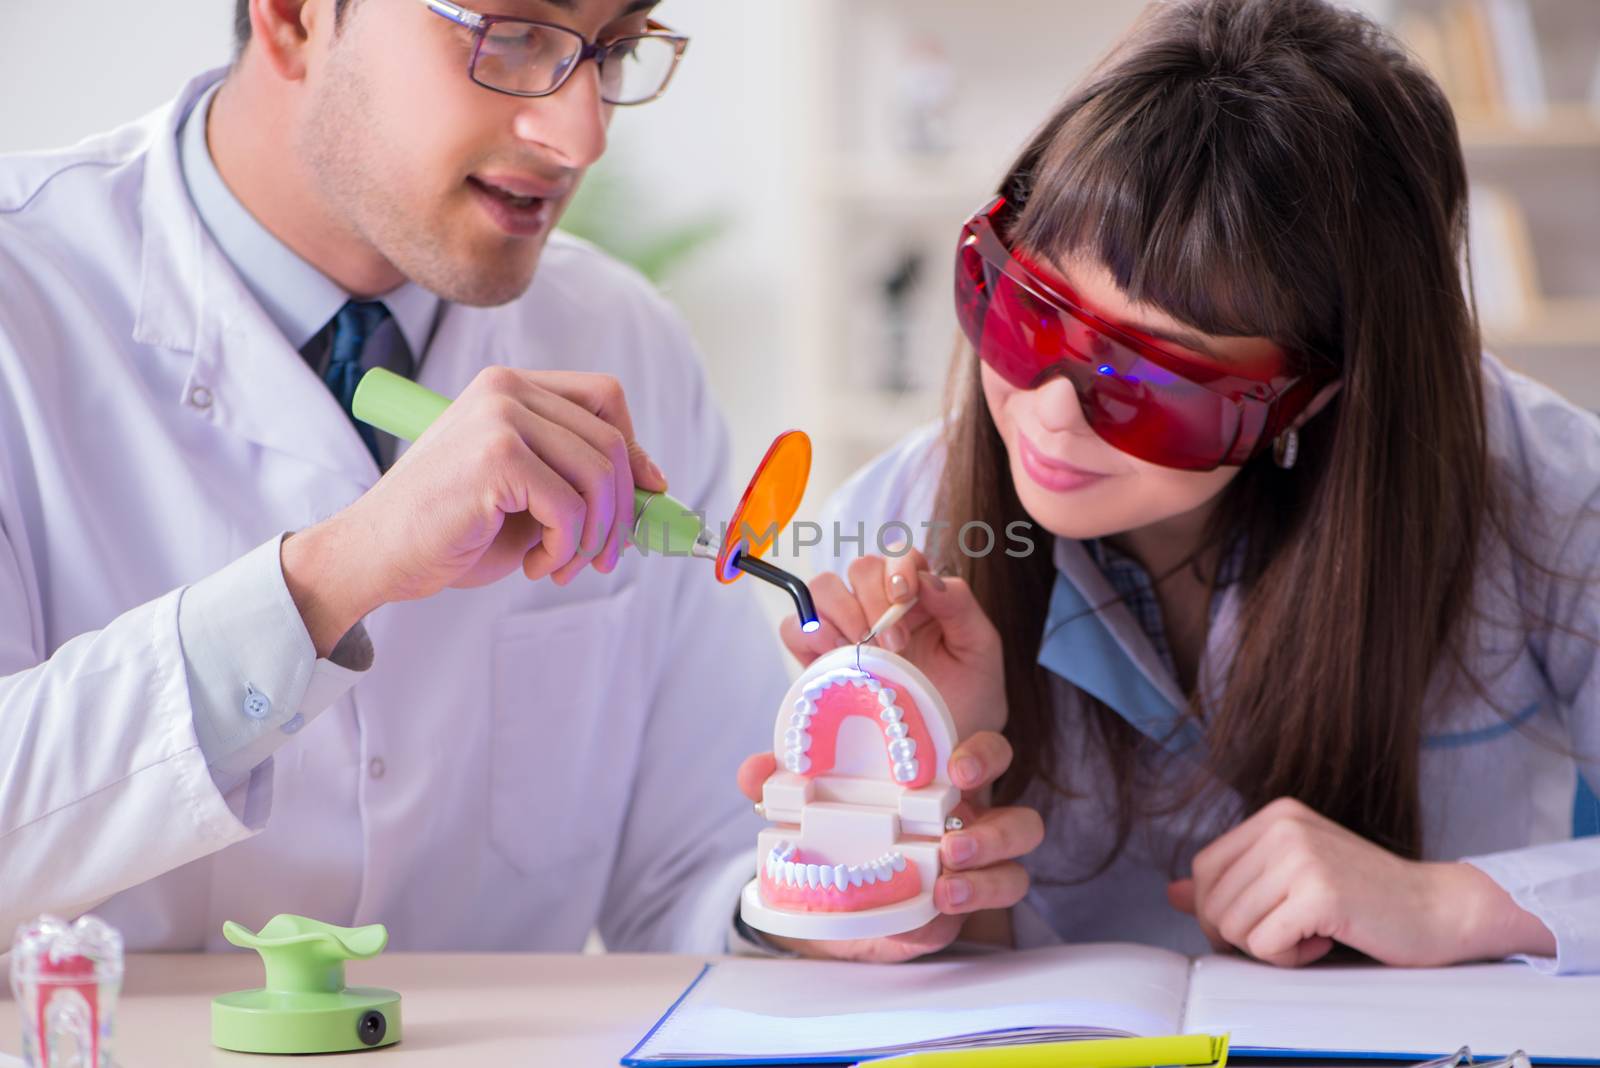 Doctor explaining to assistant how to use ultraviolet gun